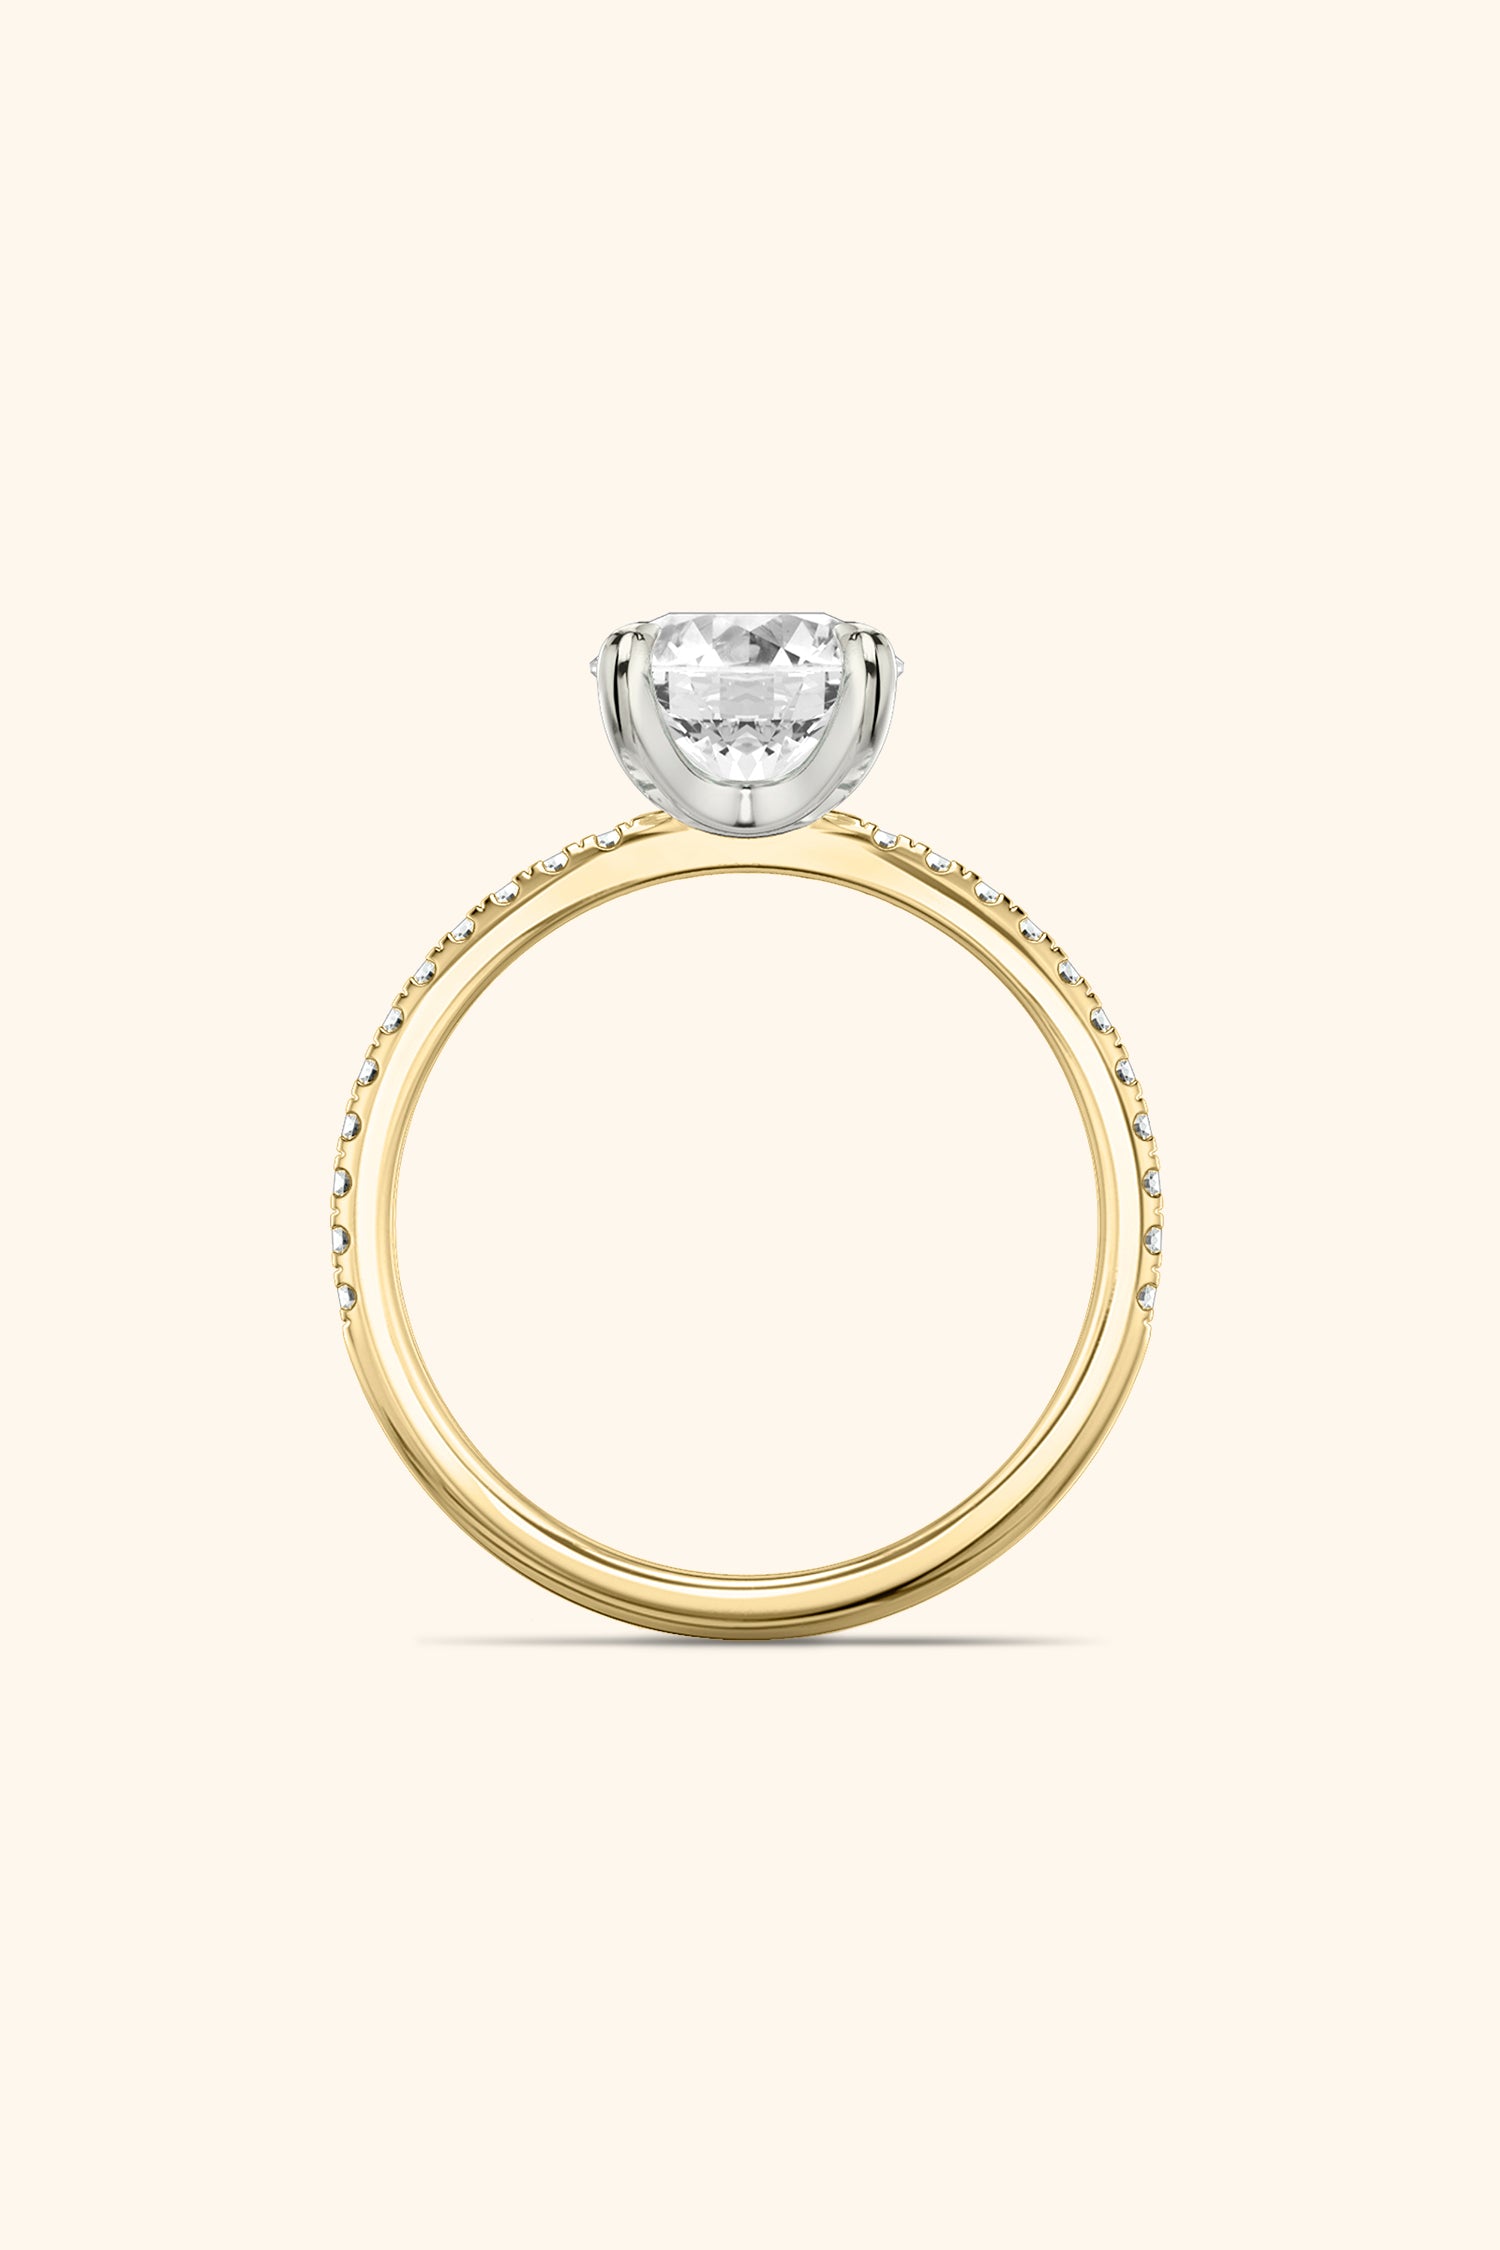 Dual Tone Glance Pave Ring with 4 Carat Round Brilliant Solitaire